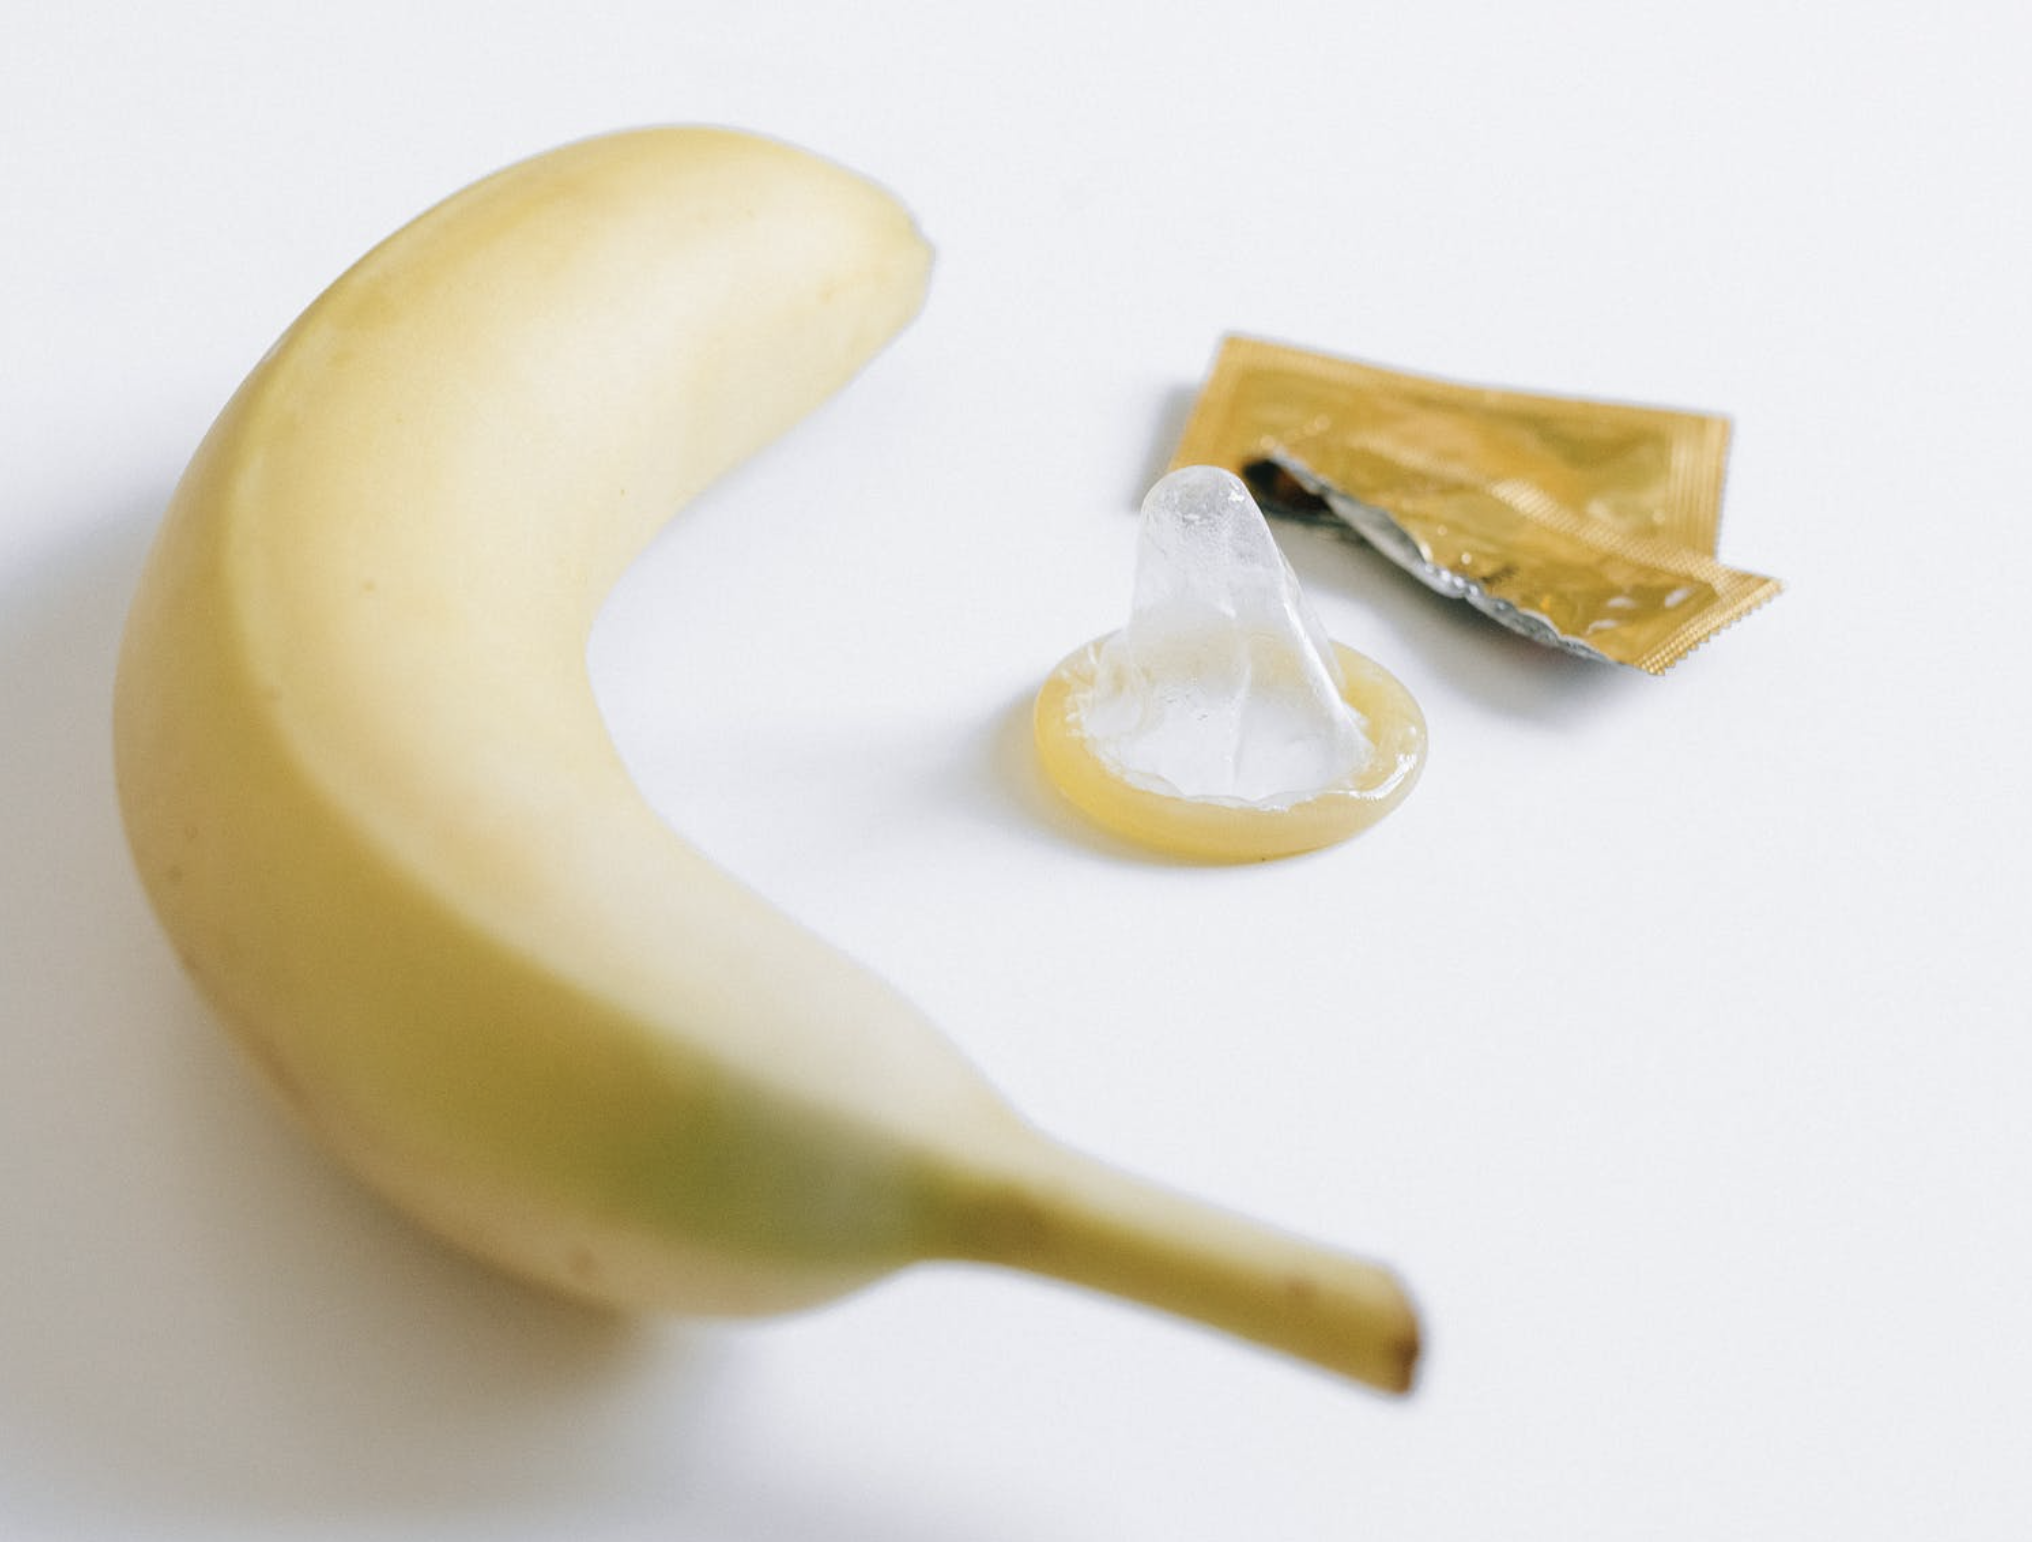 Image of a banana and a condom